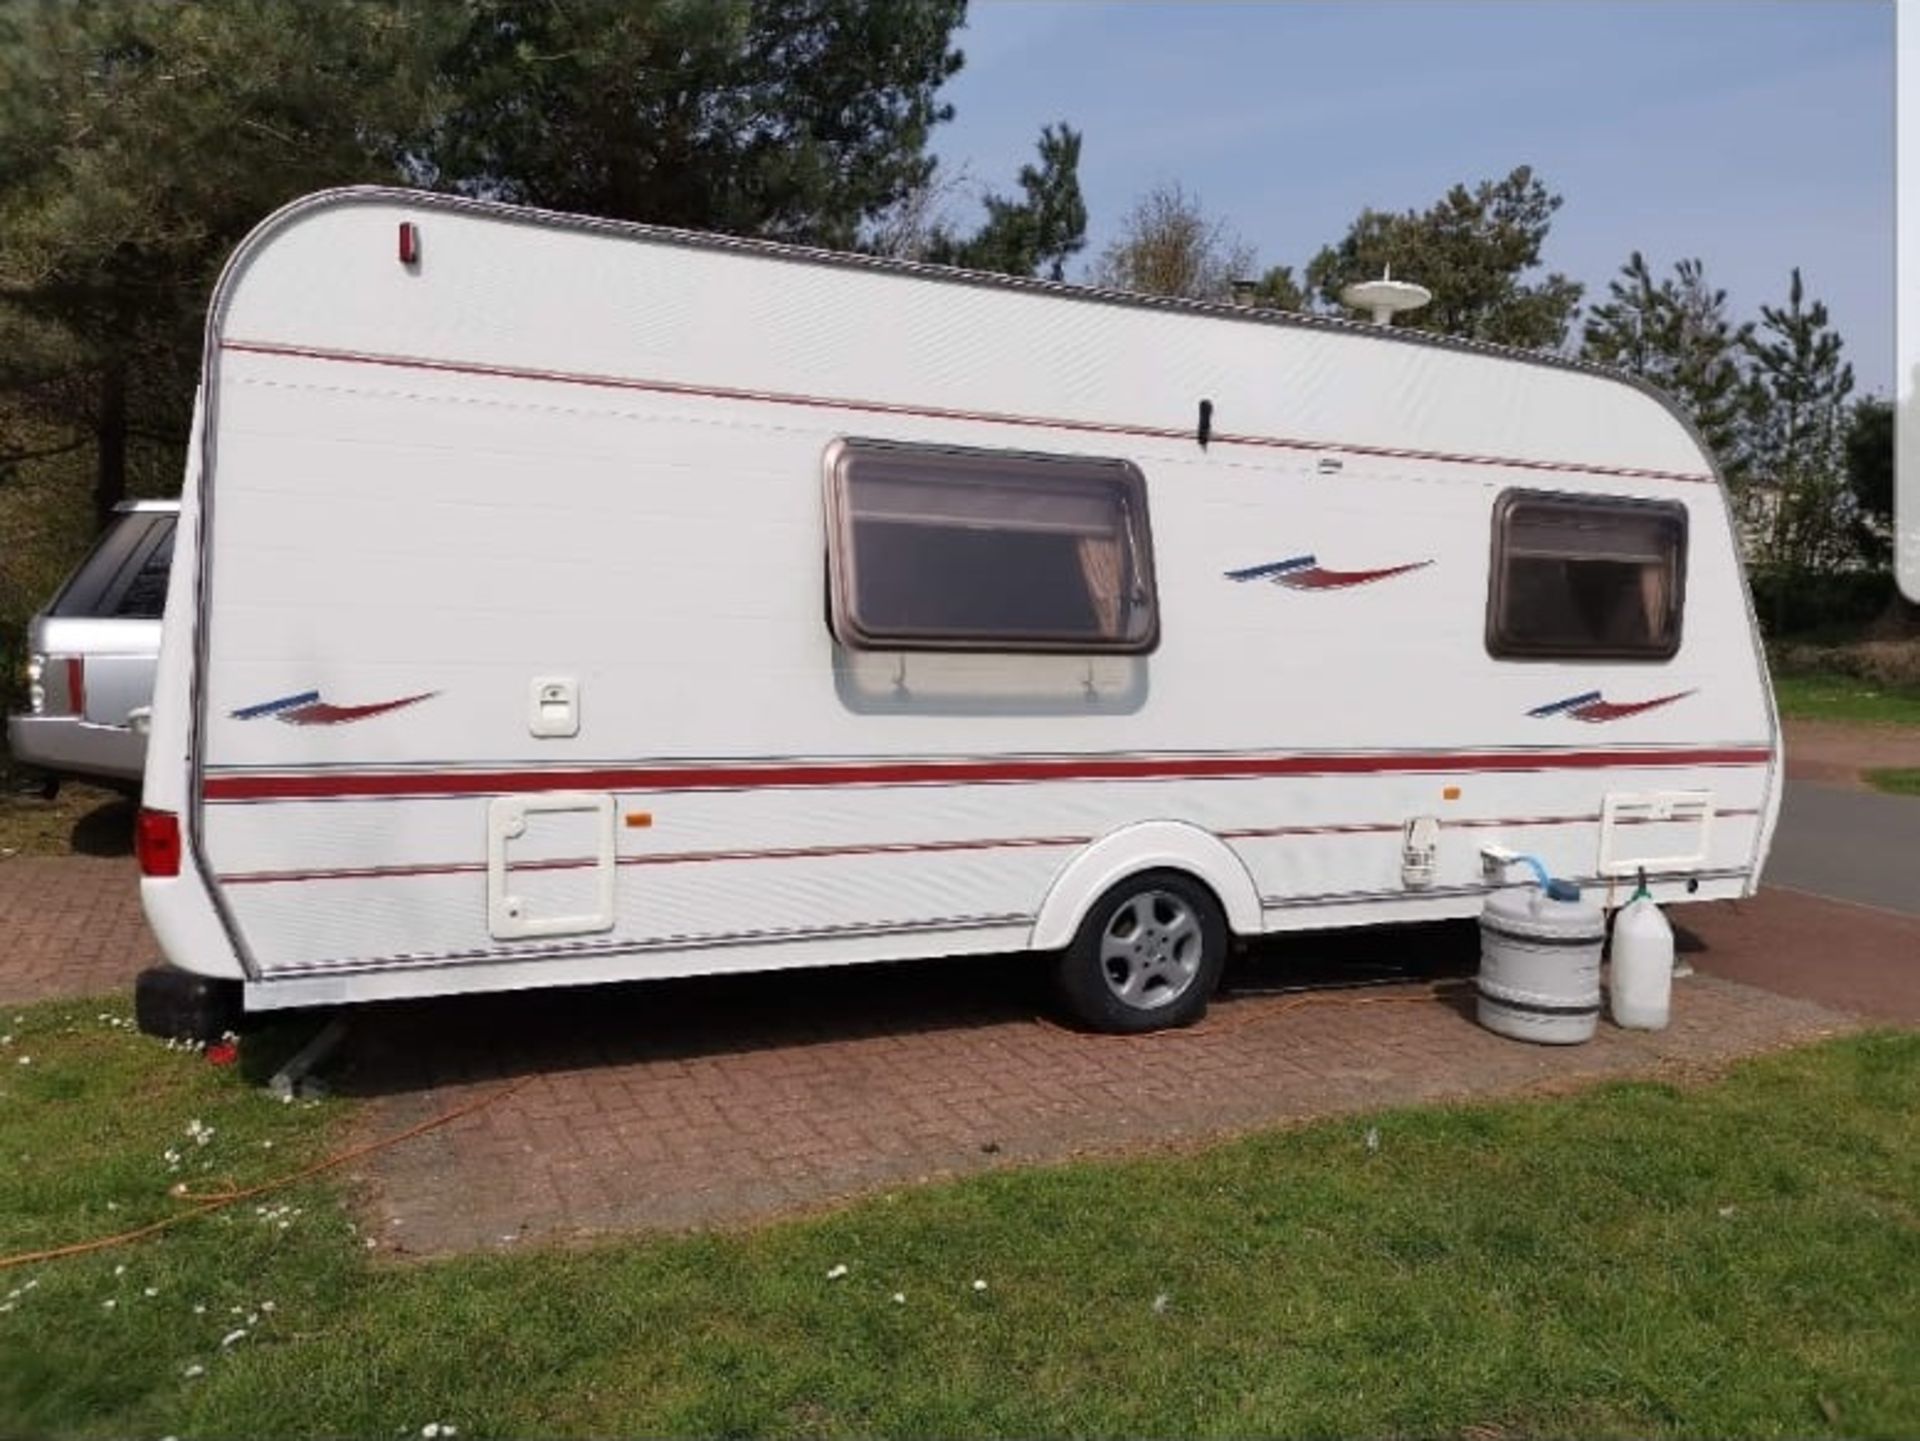 COACHMAN AMARA 4 BERTH CARAVAN COMES WITH AWNING, IN FULL WORKING ORDER, GOOD CONDITION *NO VAT* - Image 3 of 11